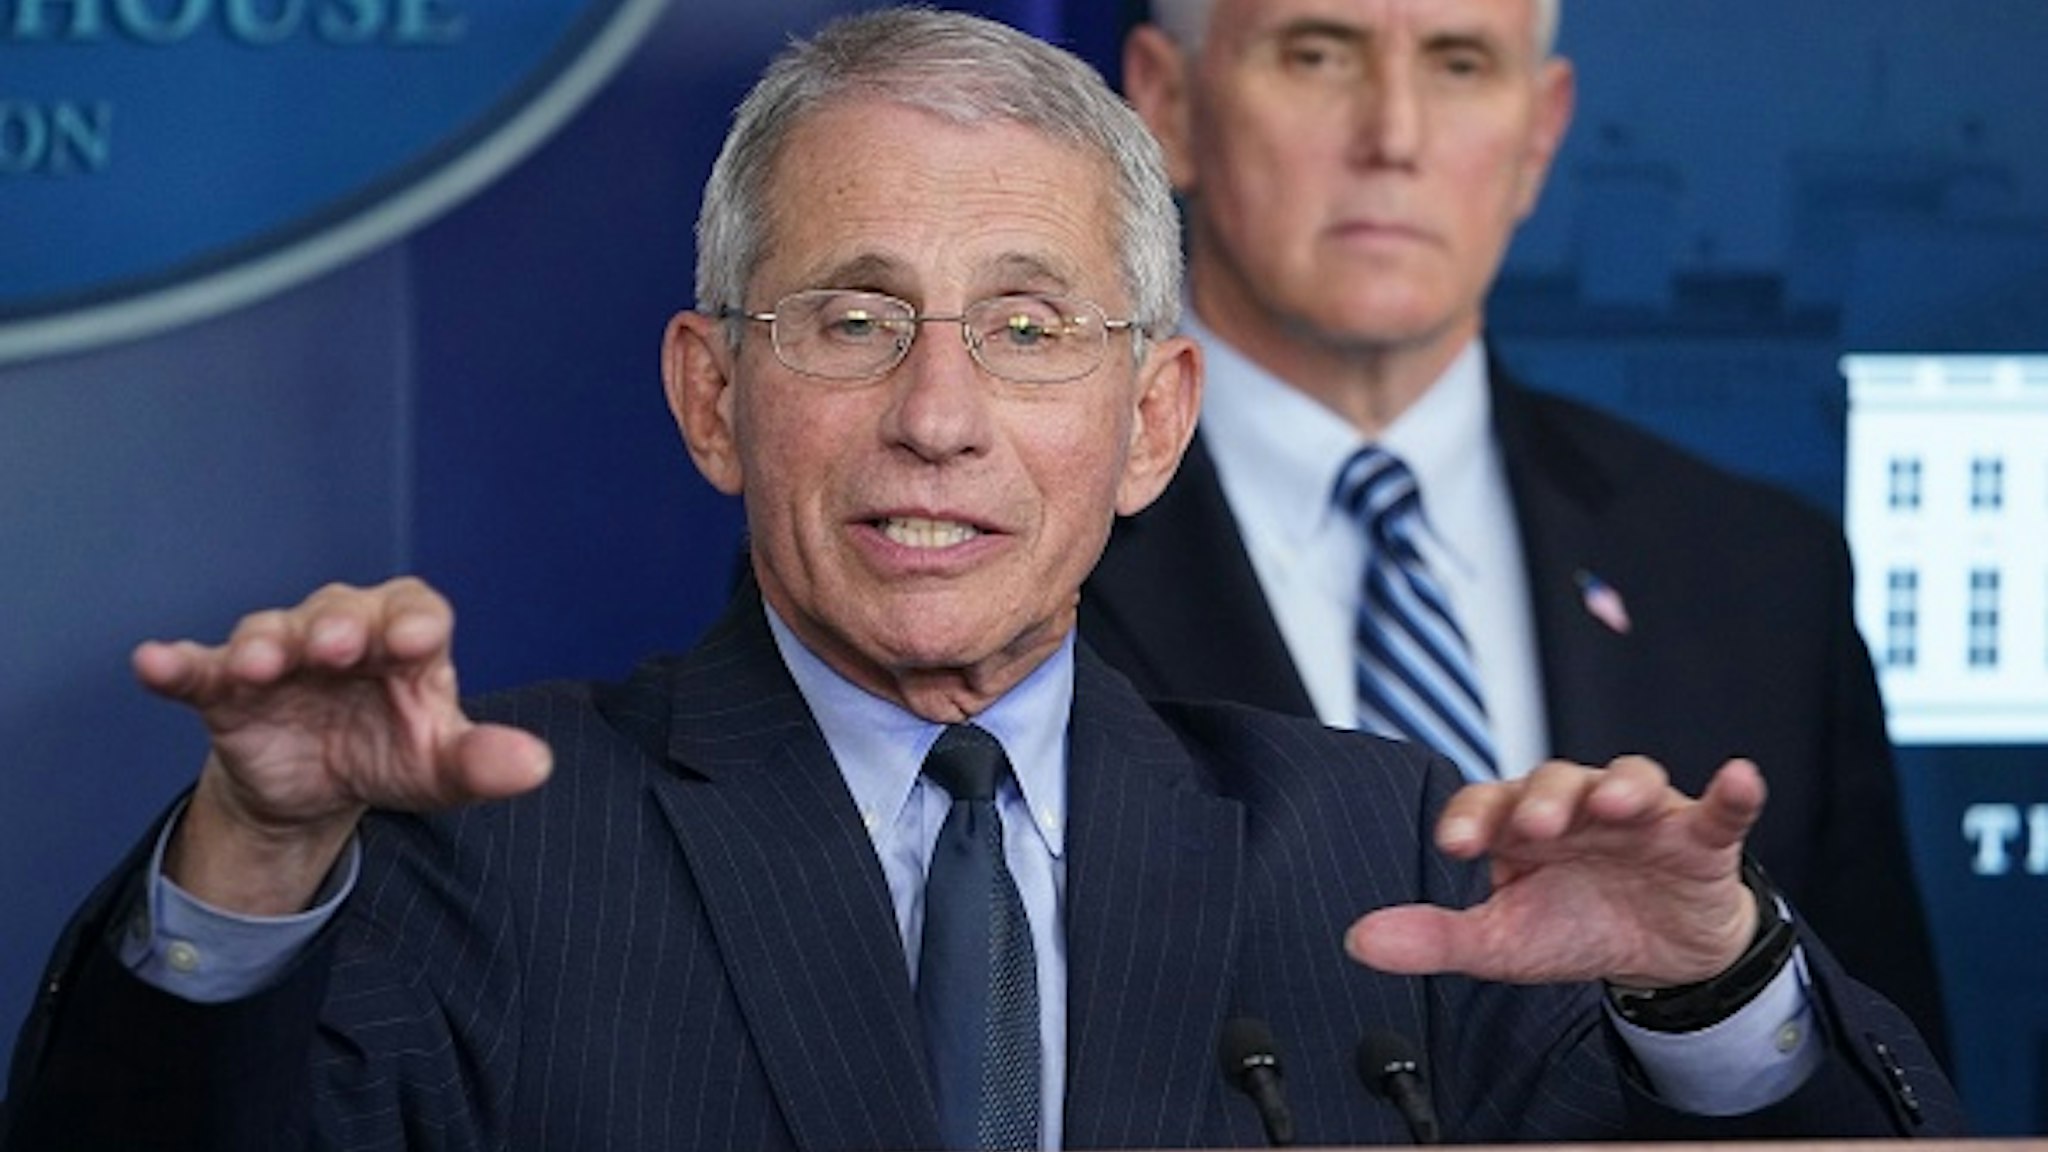 Director of the National Institute of Allergy and Infectious Diseases Anthony Fauci speaks during the daily briefing on the novel coronavirus, COVID-19, in the Brady Briefing Room at the White House on April 1, 2020, in Washington, DC.